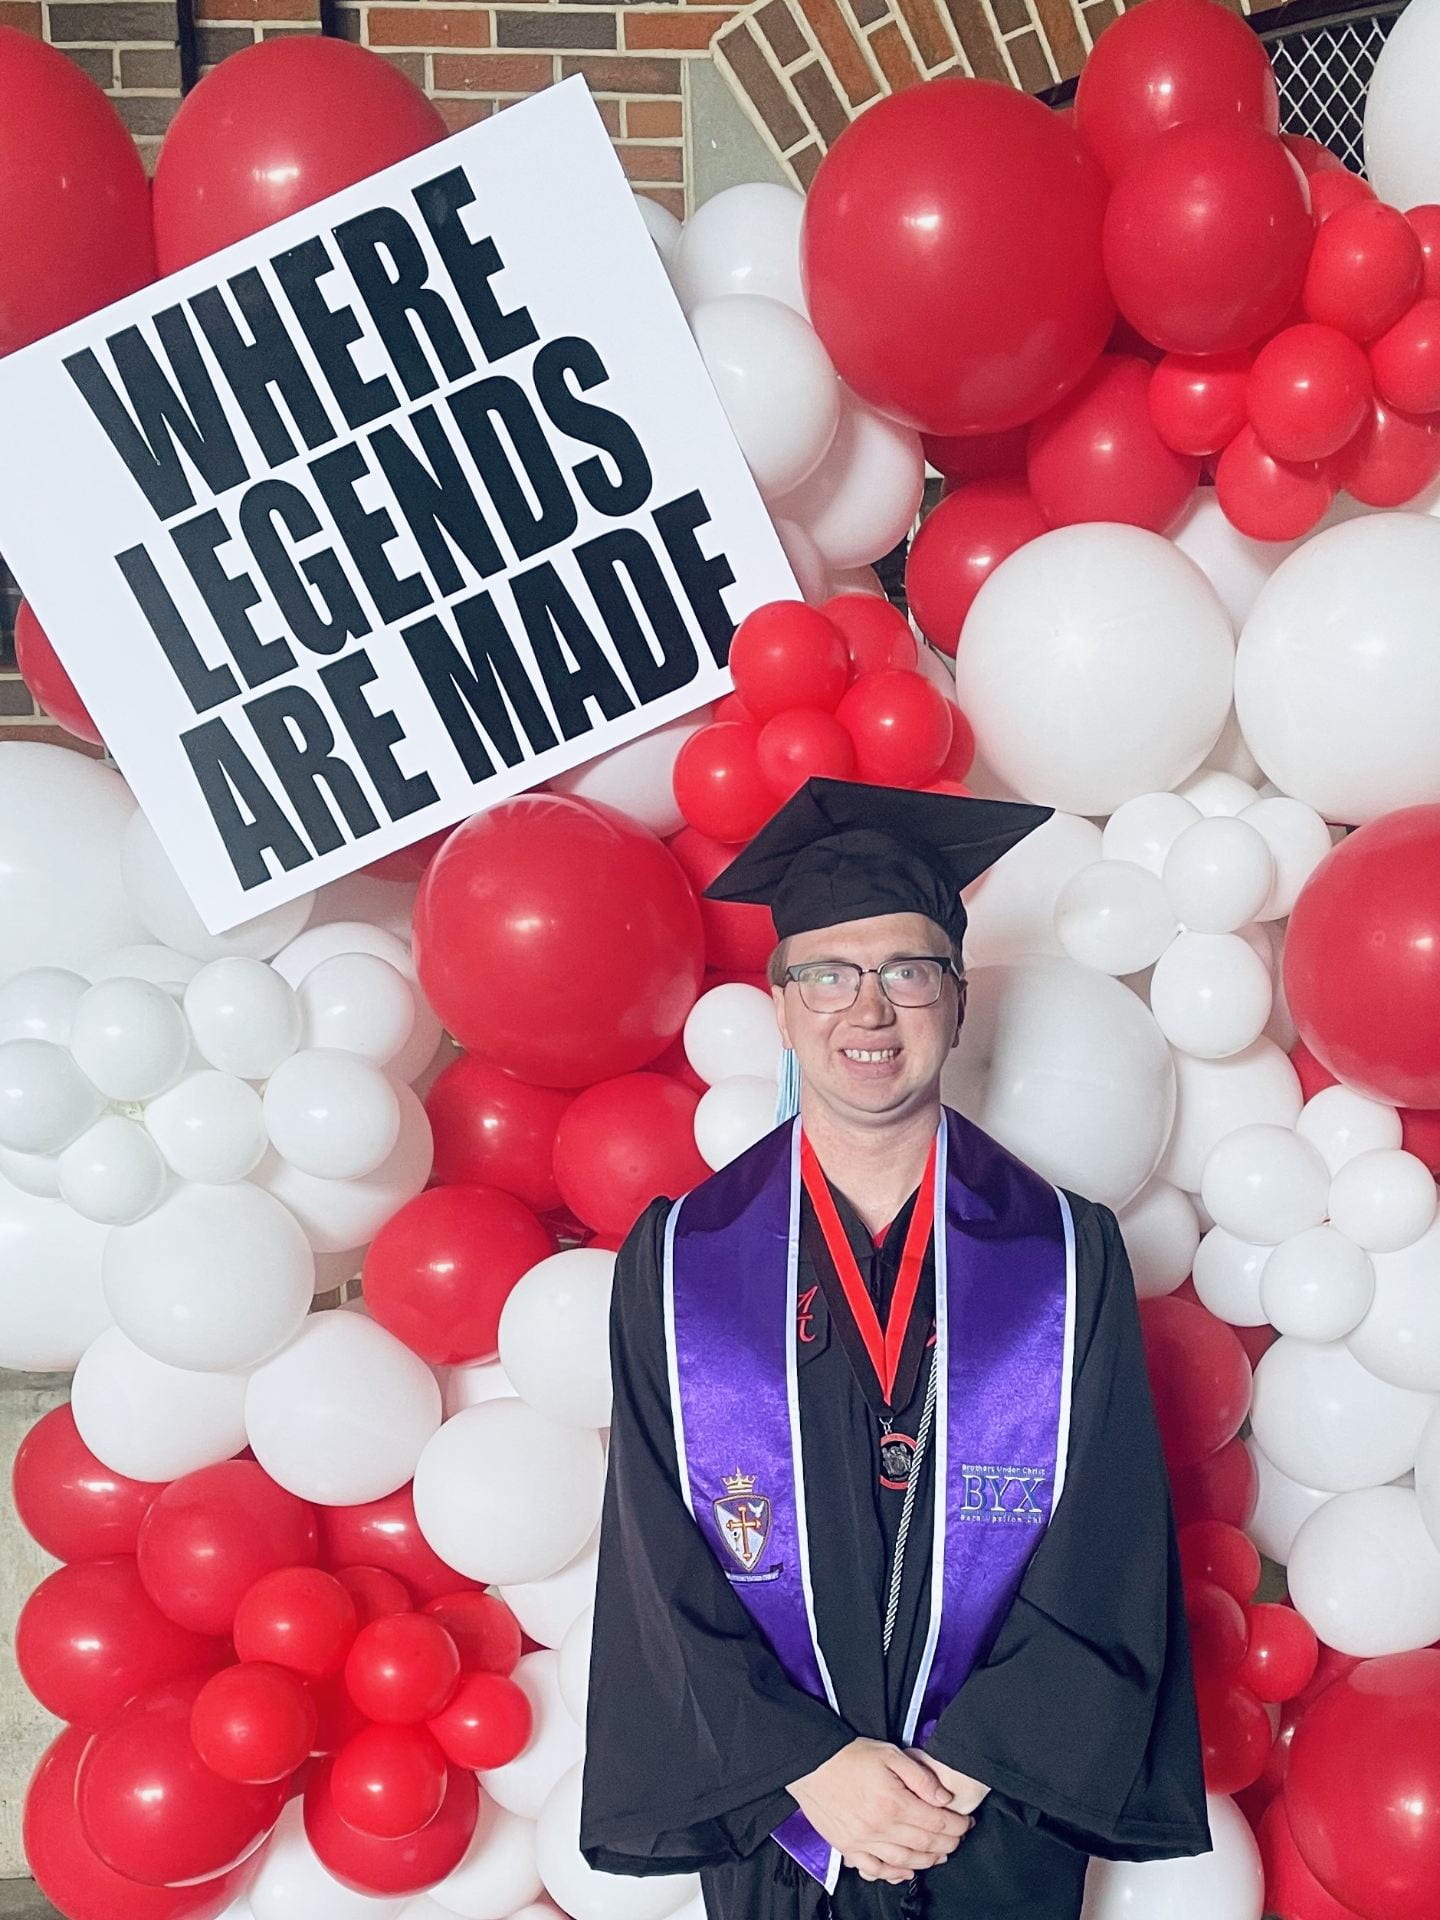 Colby stands in a black graduation cap and gown. He stands in front of a wall of red and white balloons, with a sign above that reads "where legends are made."